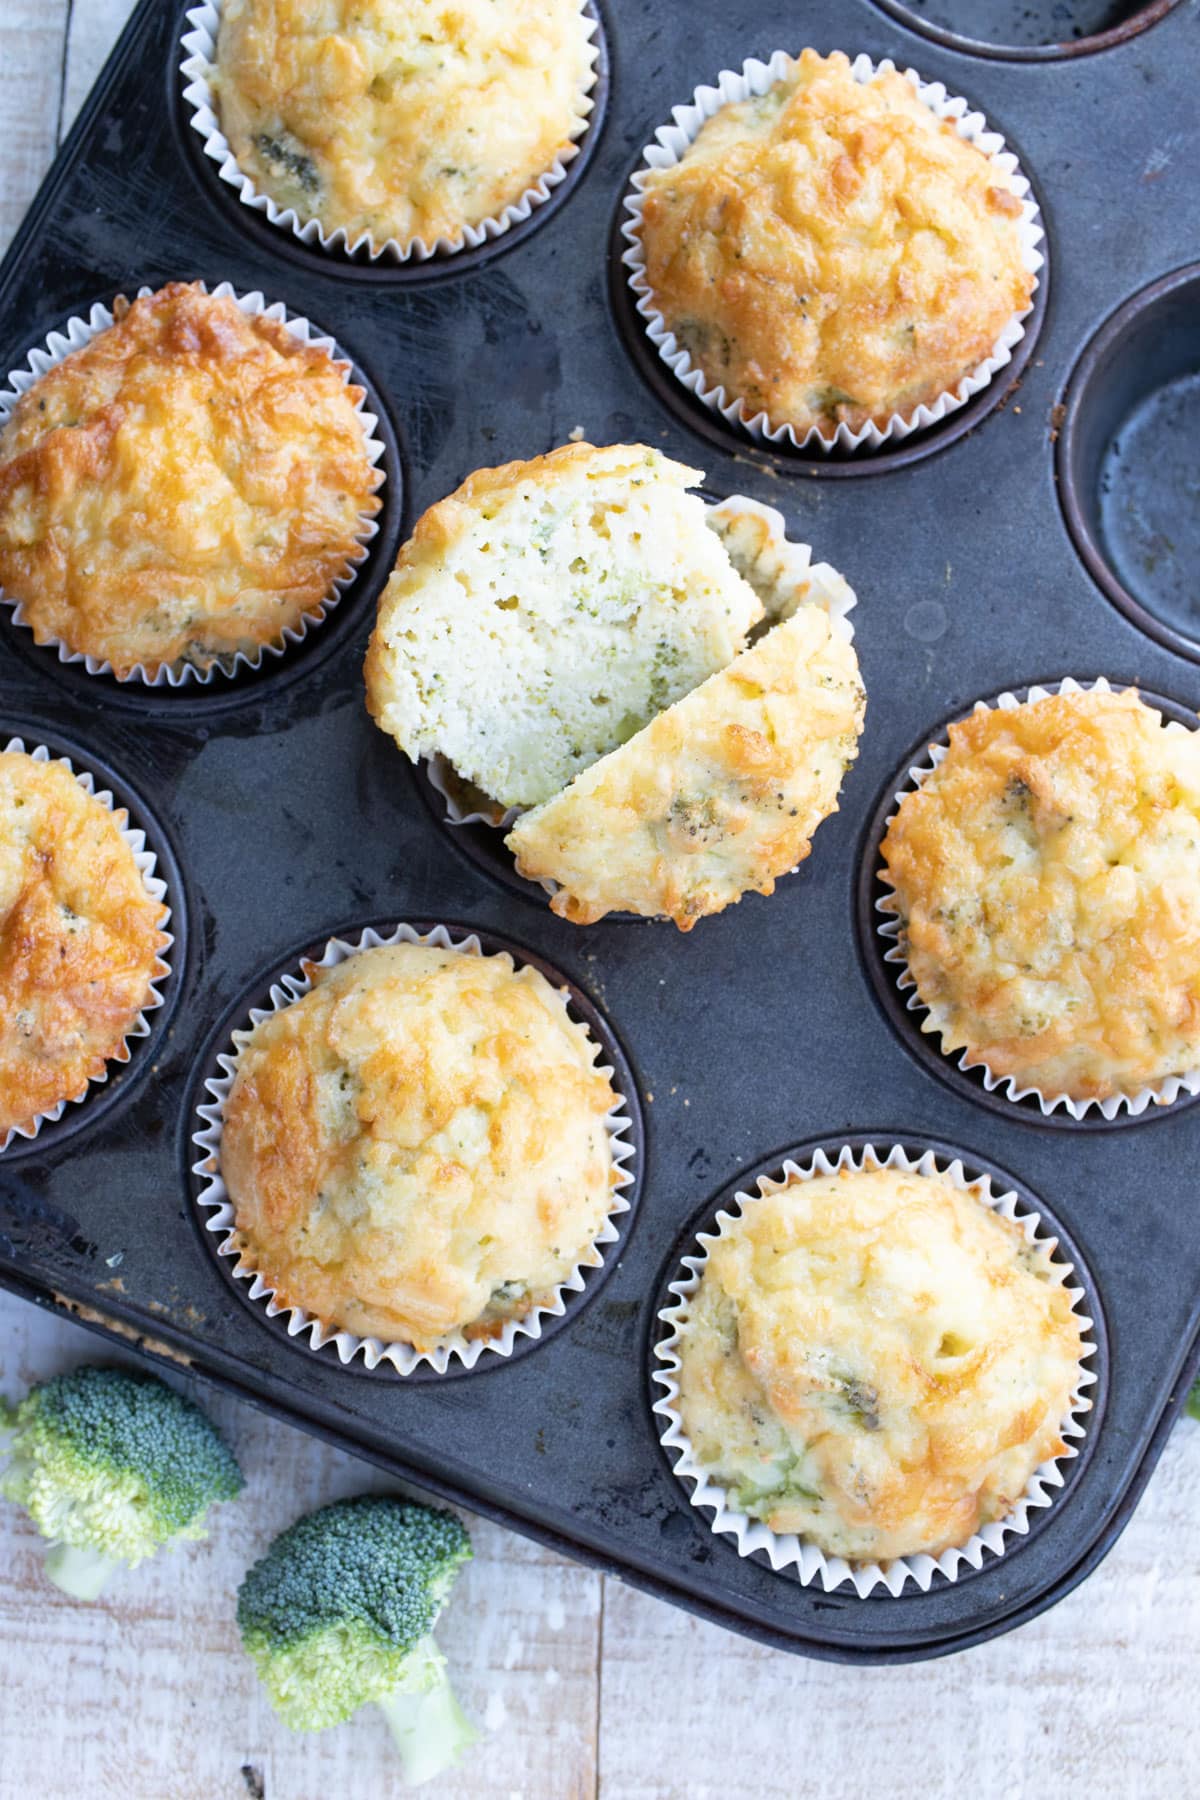 A muffin pan with broccoli muffins.